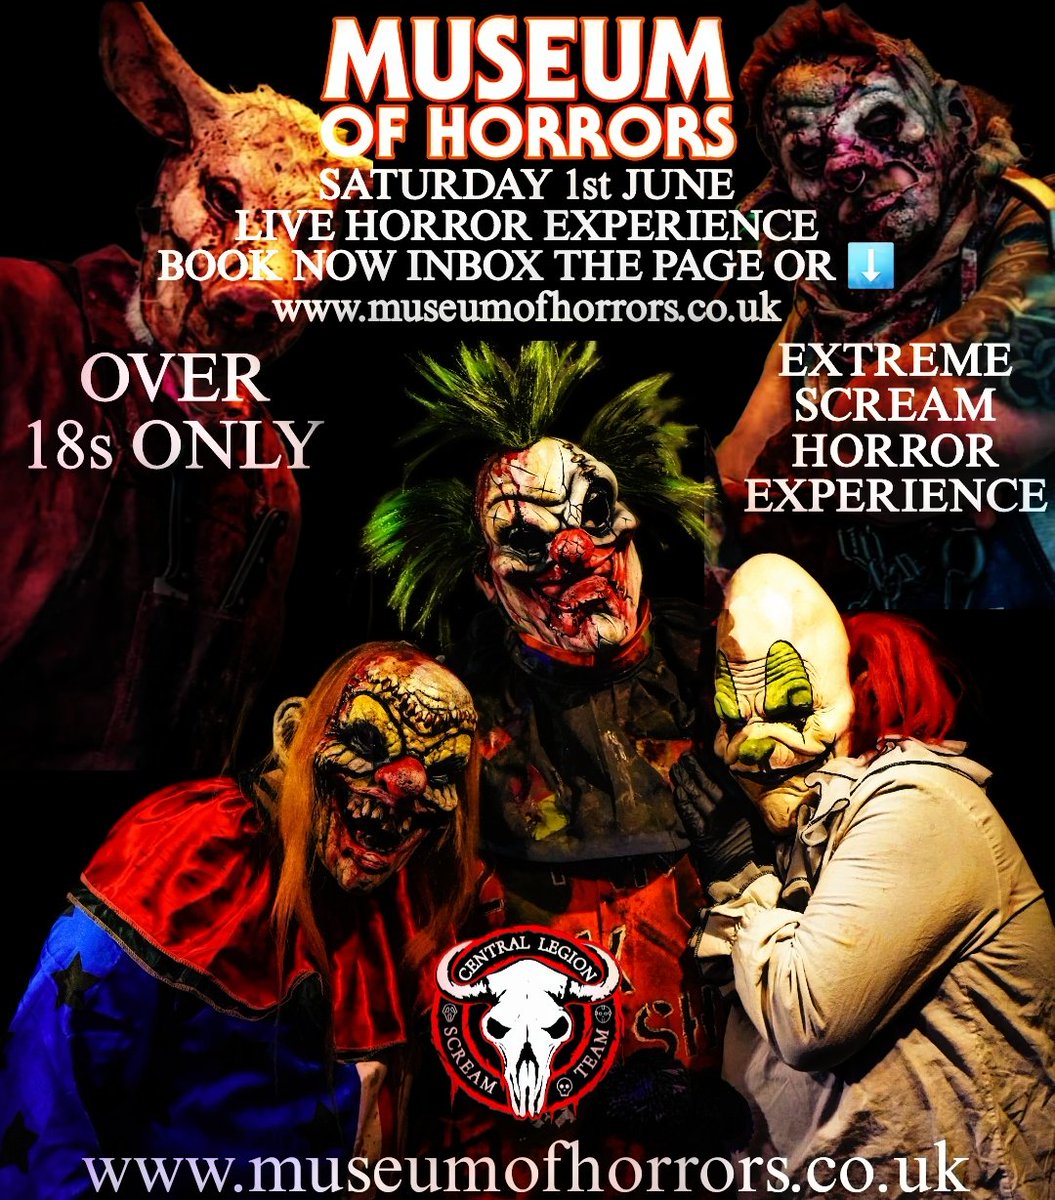 Tickets on sale NOW for June's live horror experience inbox the Facebook page to book or museumofhorrors.co.uk 
#horror #HorrorCommunity #Horrorfam #HorrorMovies #scareattraction #scaremaze #museumofhorrors #stoke @Visit_N_Staffs @BBCRadioStoke #staffordshire #stokeontrent